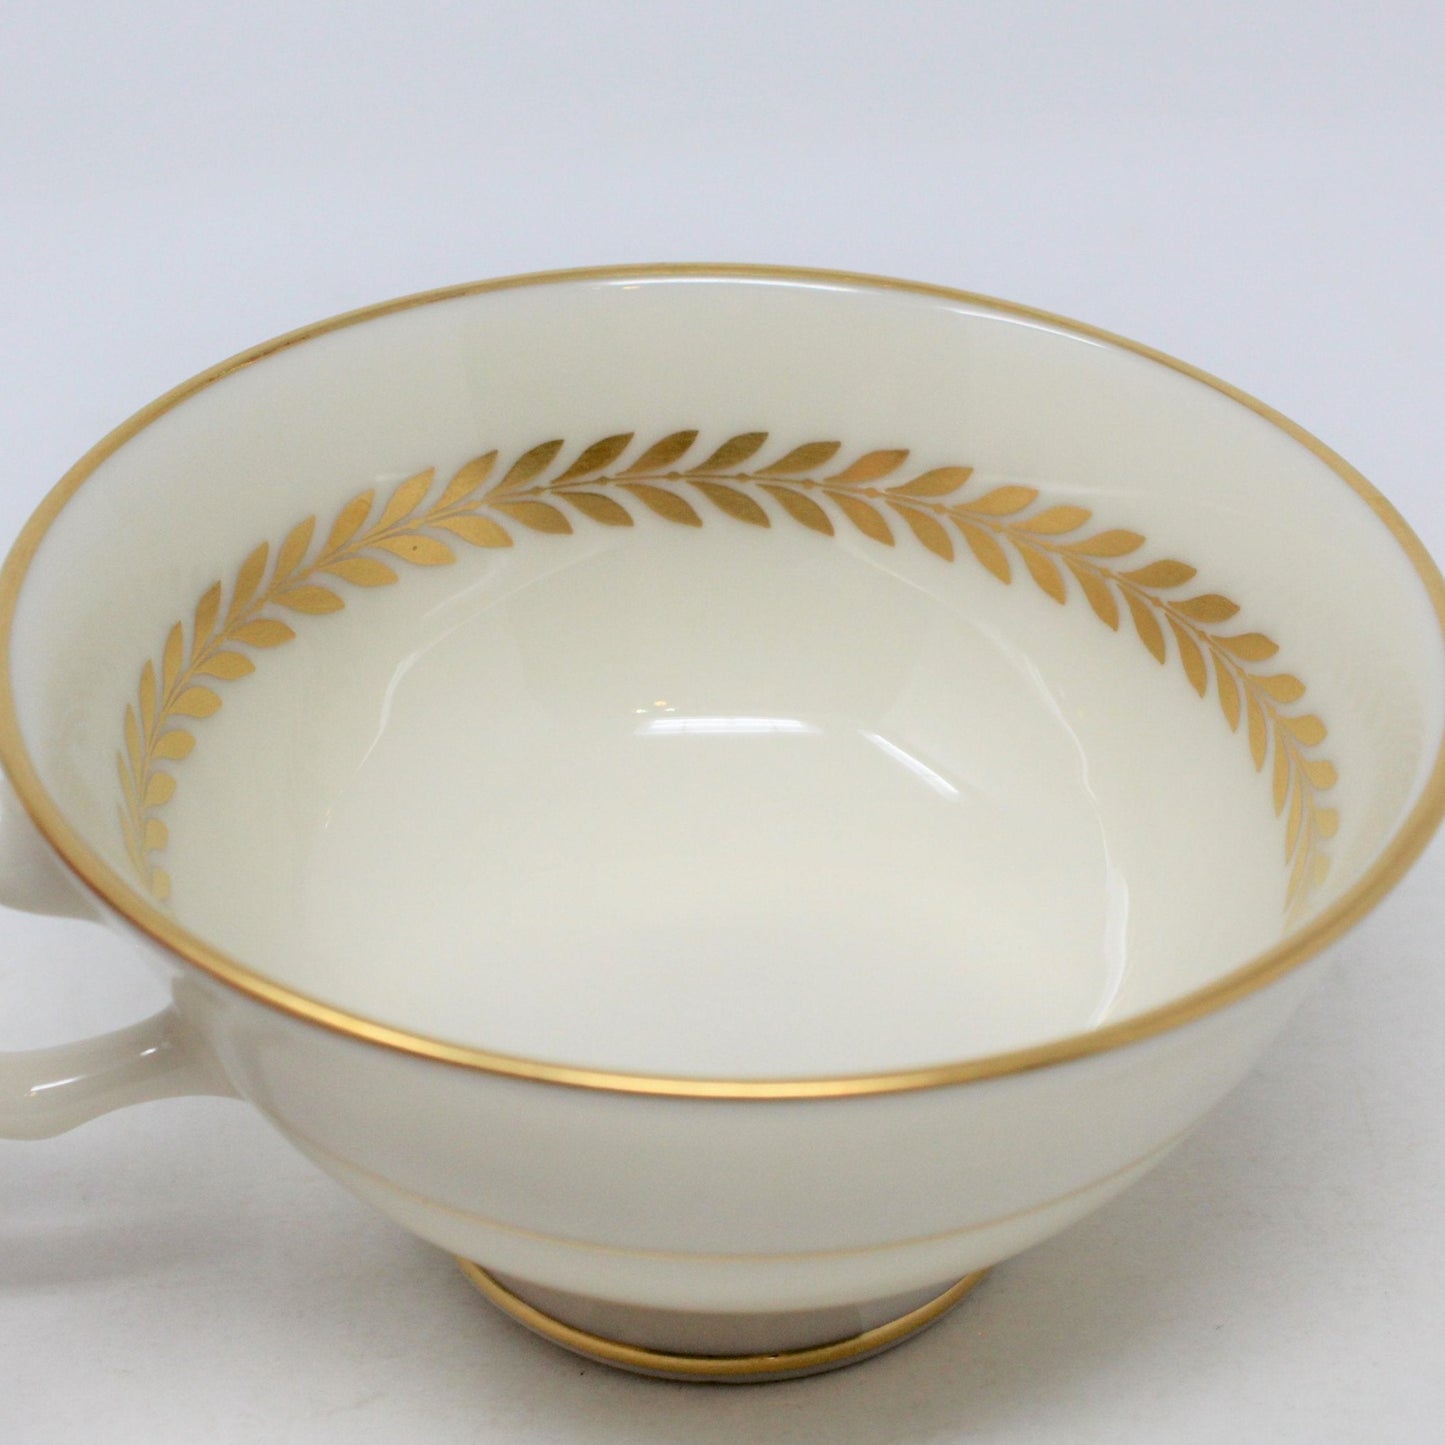 Teacup and Saucer, Lenox, Imperial P-338, USA Vintage